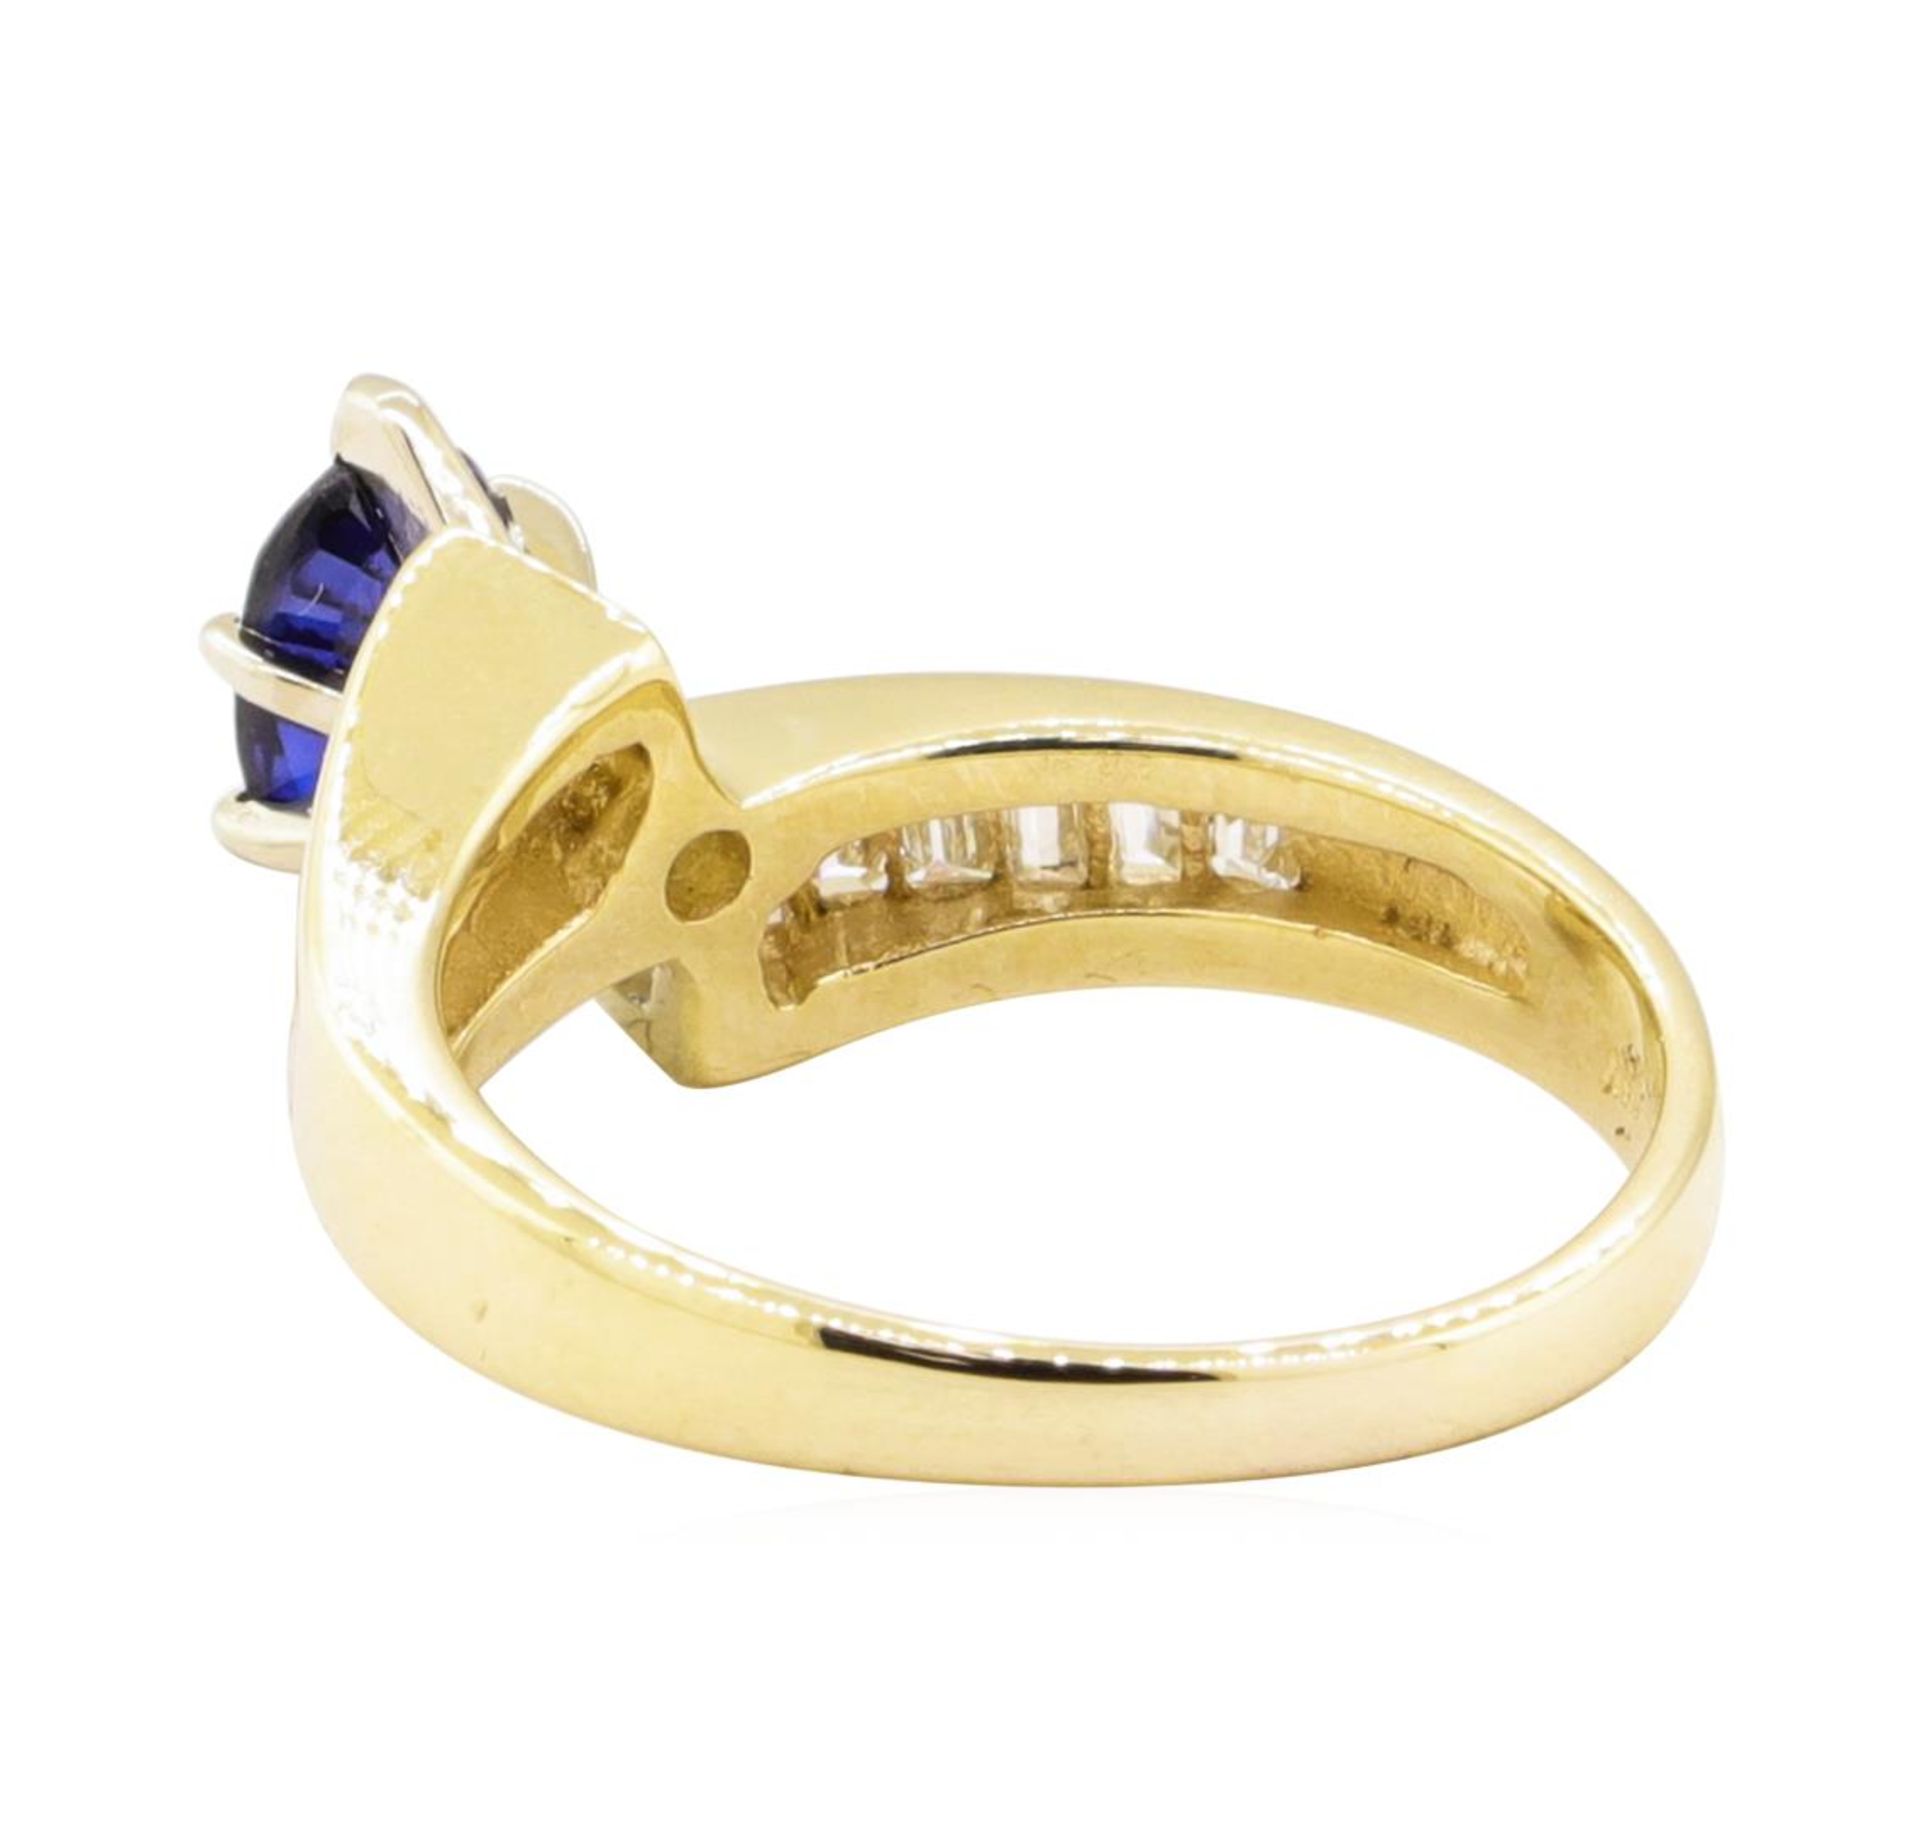 1.38 ctw Blue Sapphire and Diamond Ring - 14KT Yellow Gold - Image 3 of 4